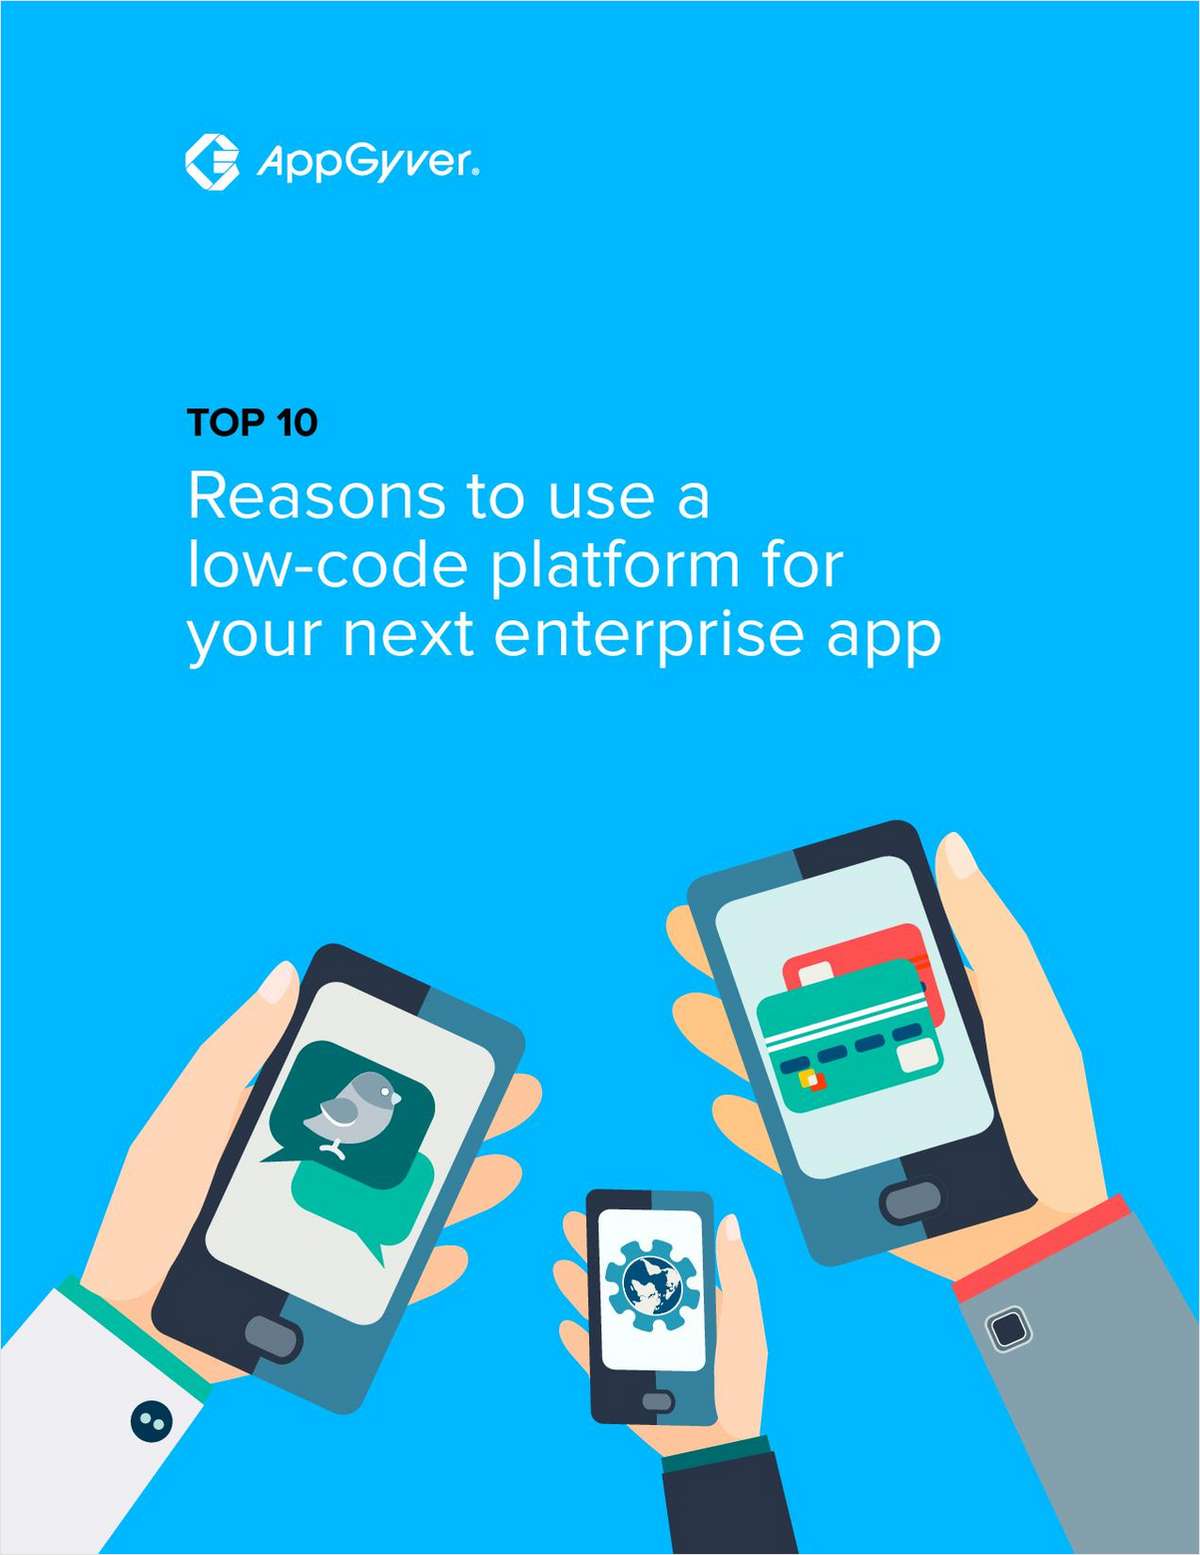 10 Reasons to Use a Low-Code Platform for Your Next Enterprise App